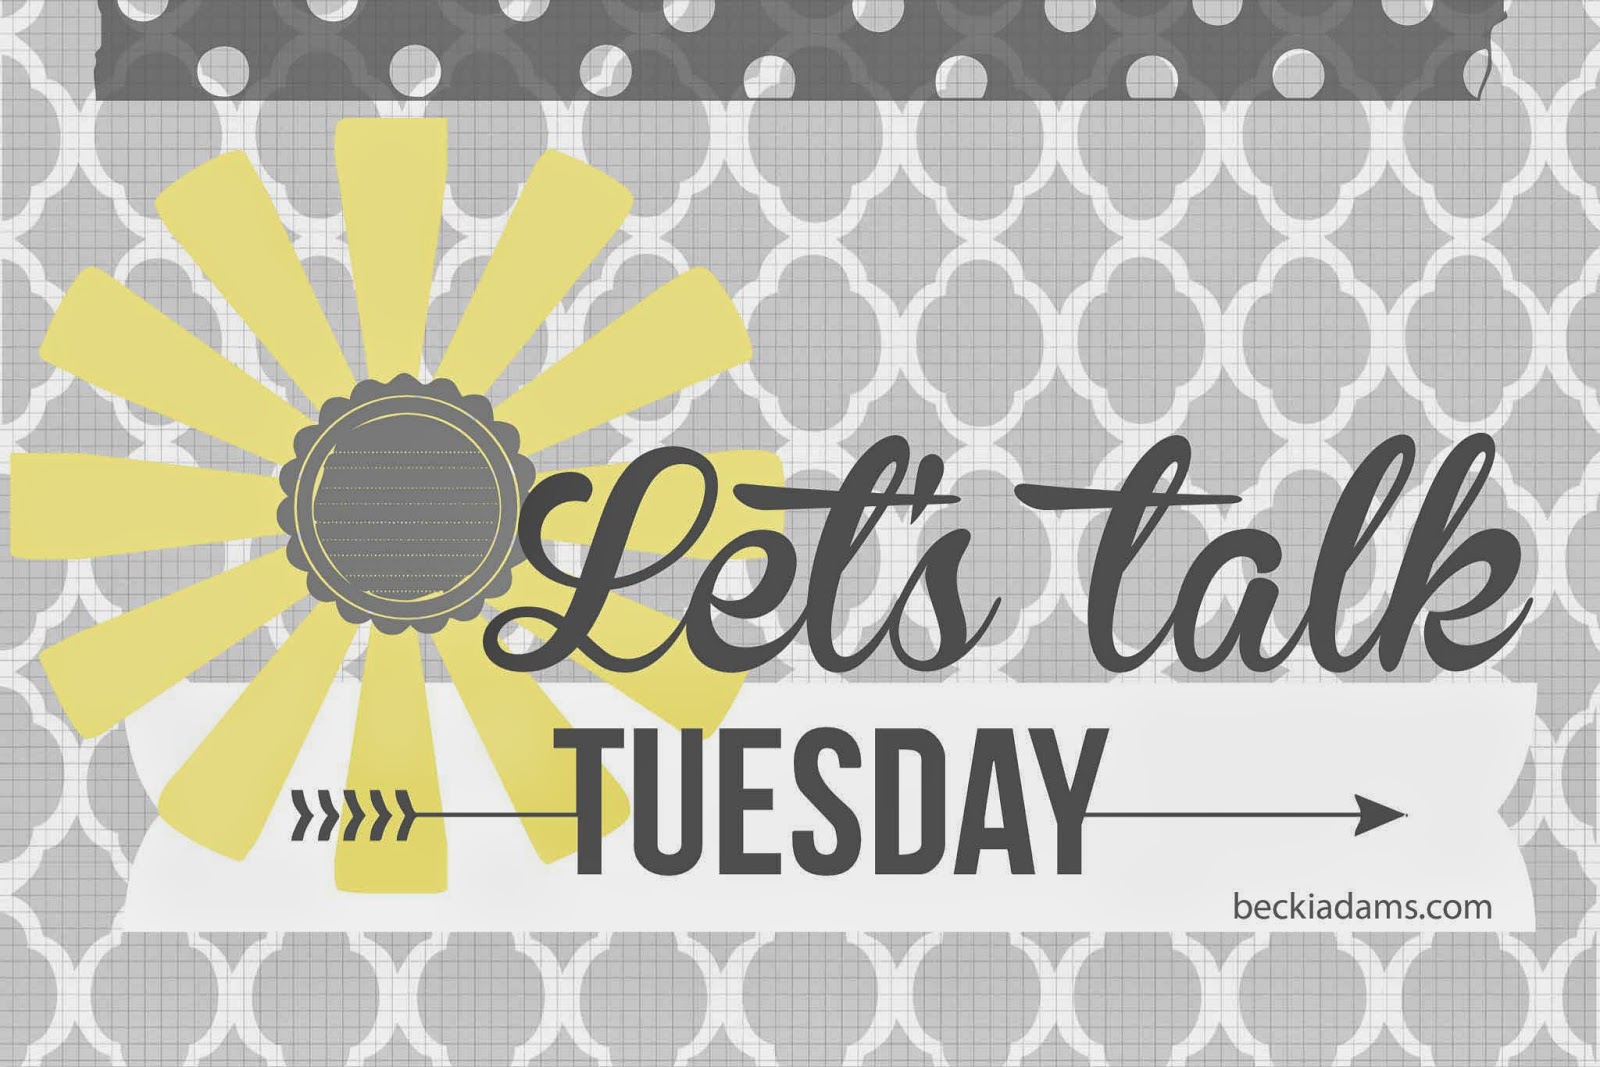 Becki Adams: Let's Talk Tuesday: Using ALL of Your Letter Stickers